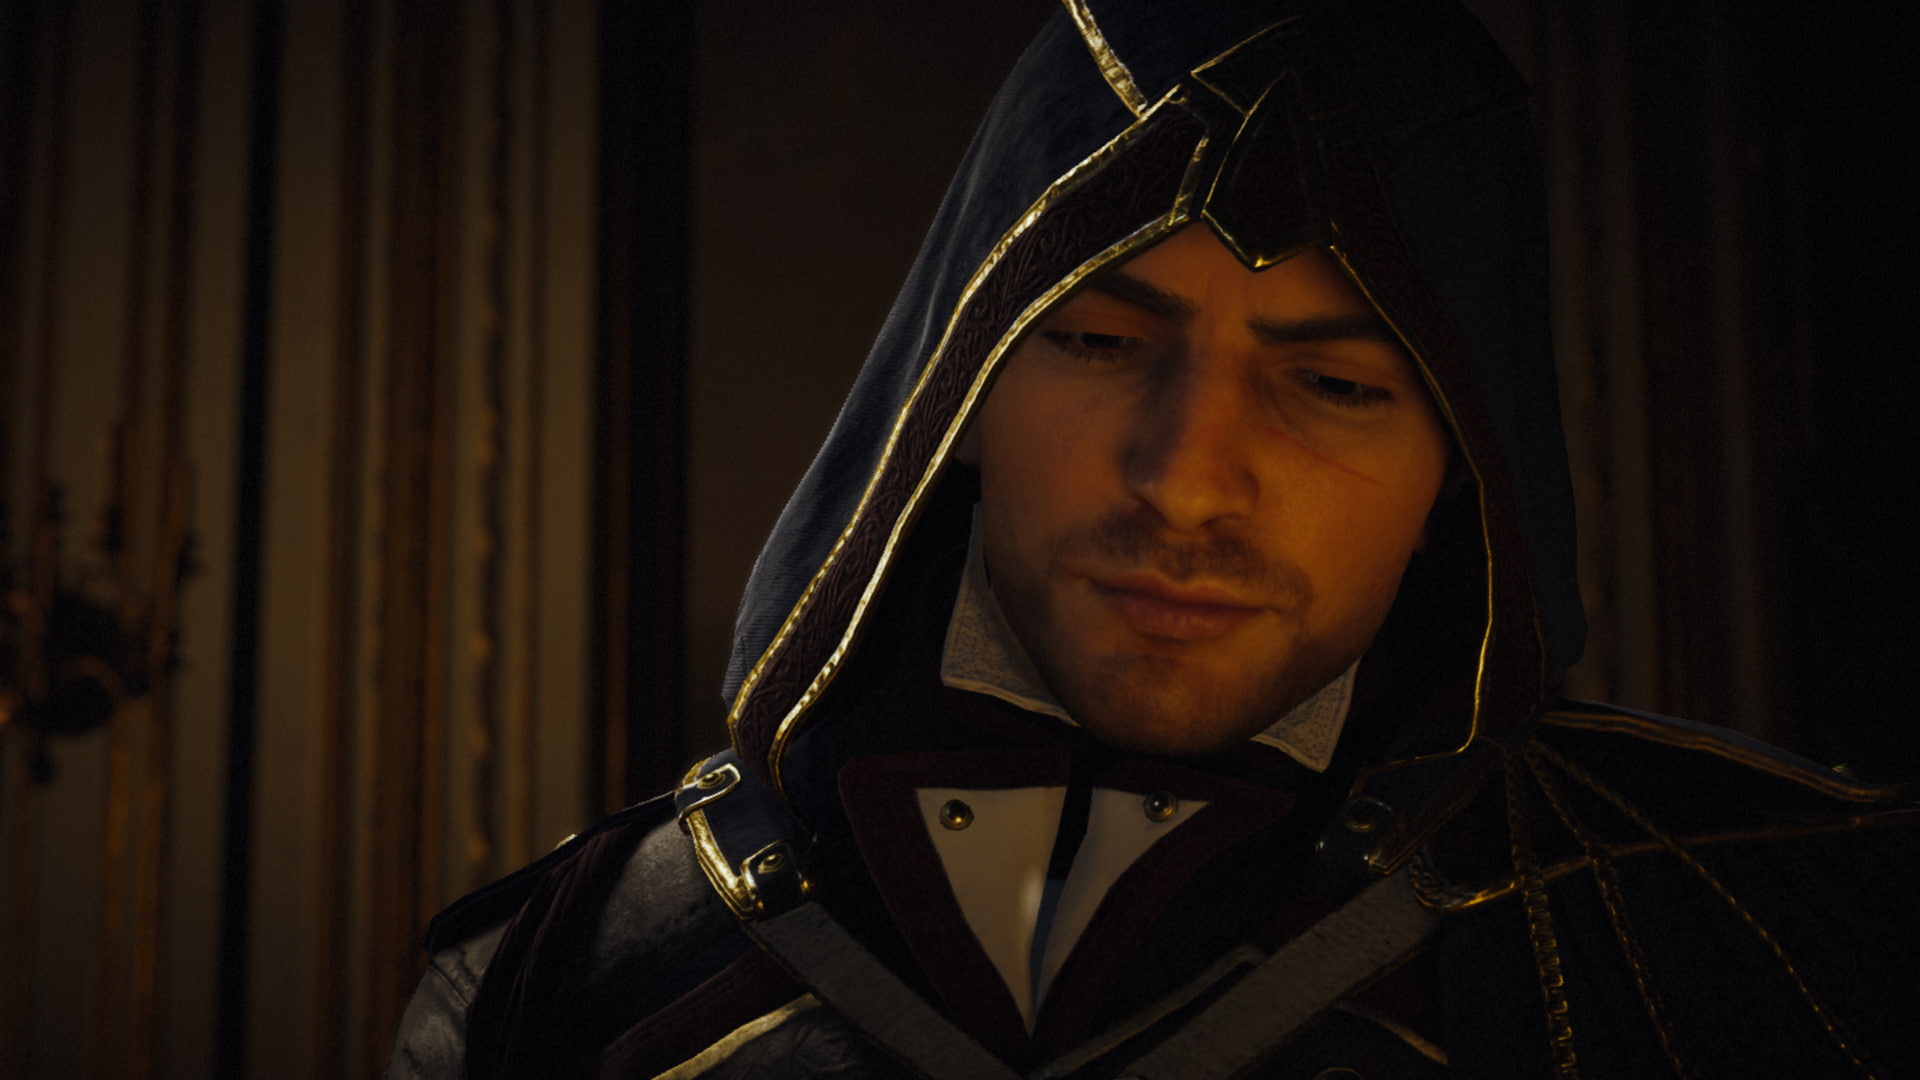 video games, Assassin's Creed, Assassin's Creed:  Unity, Assassin's Creed Unity: Dead Kings